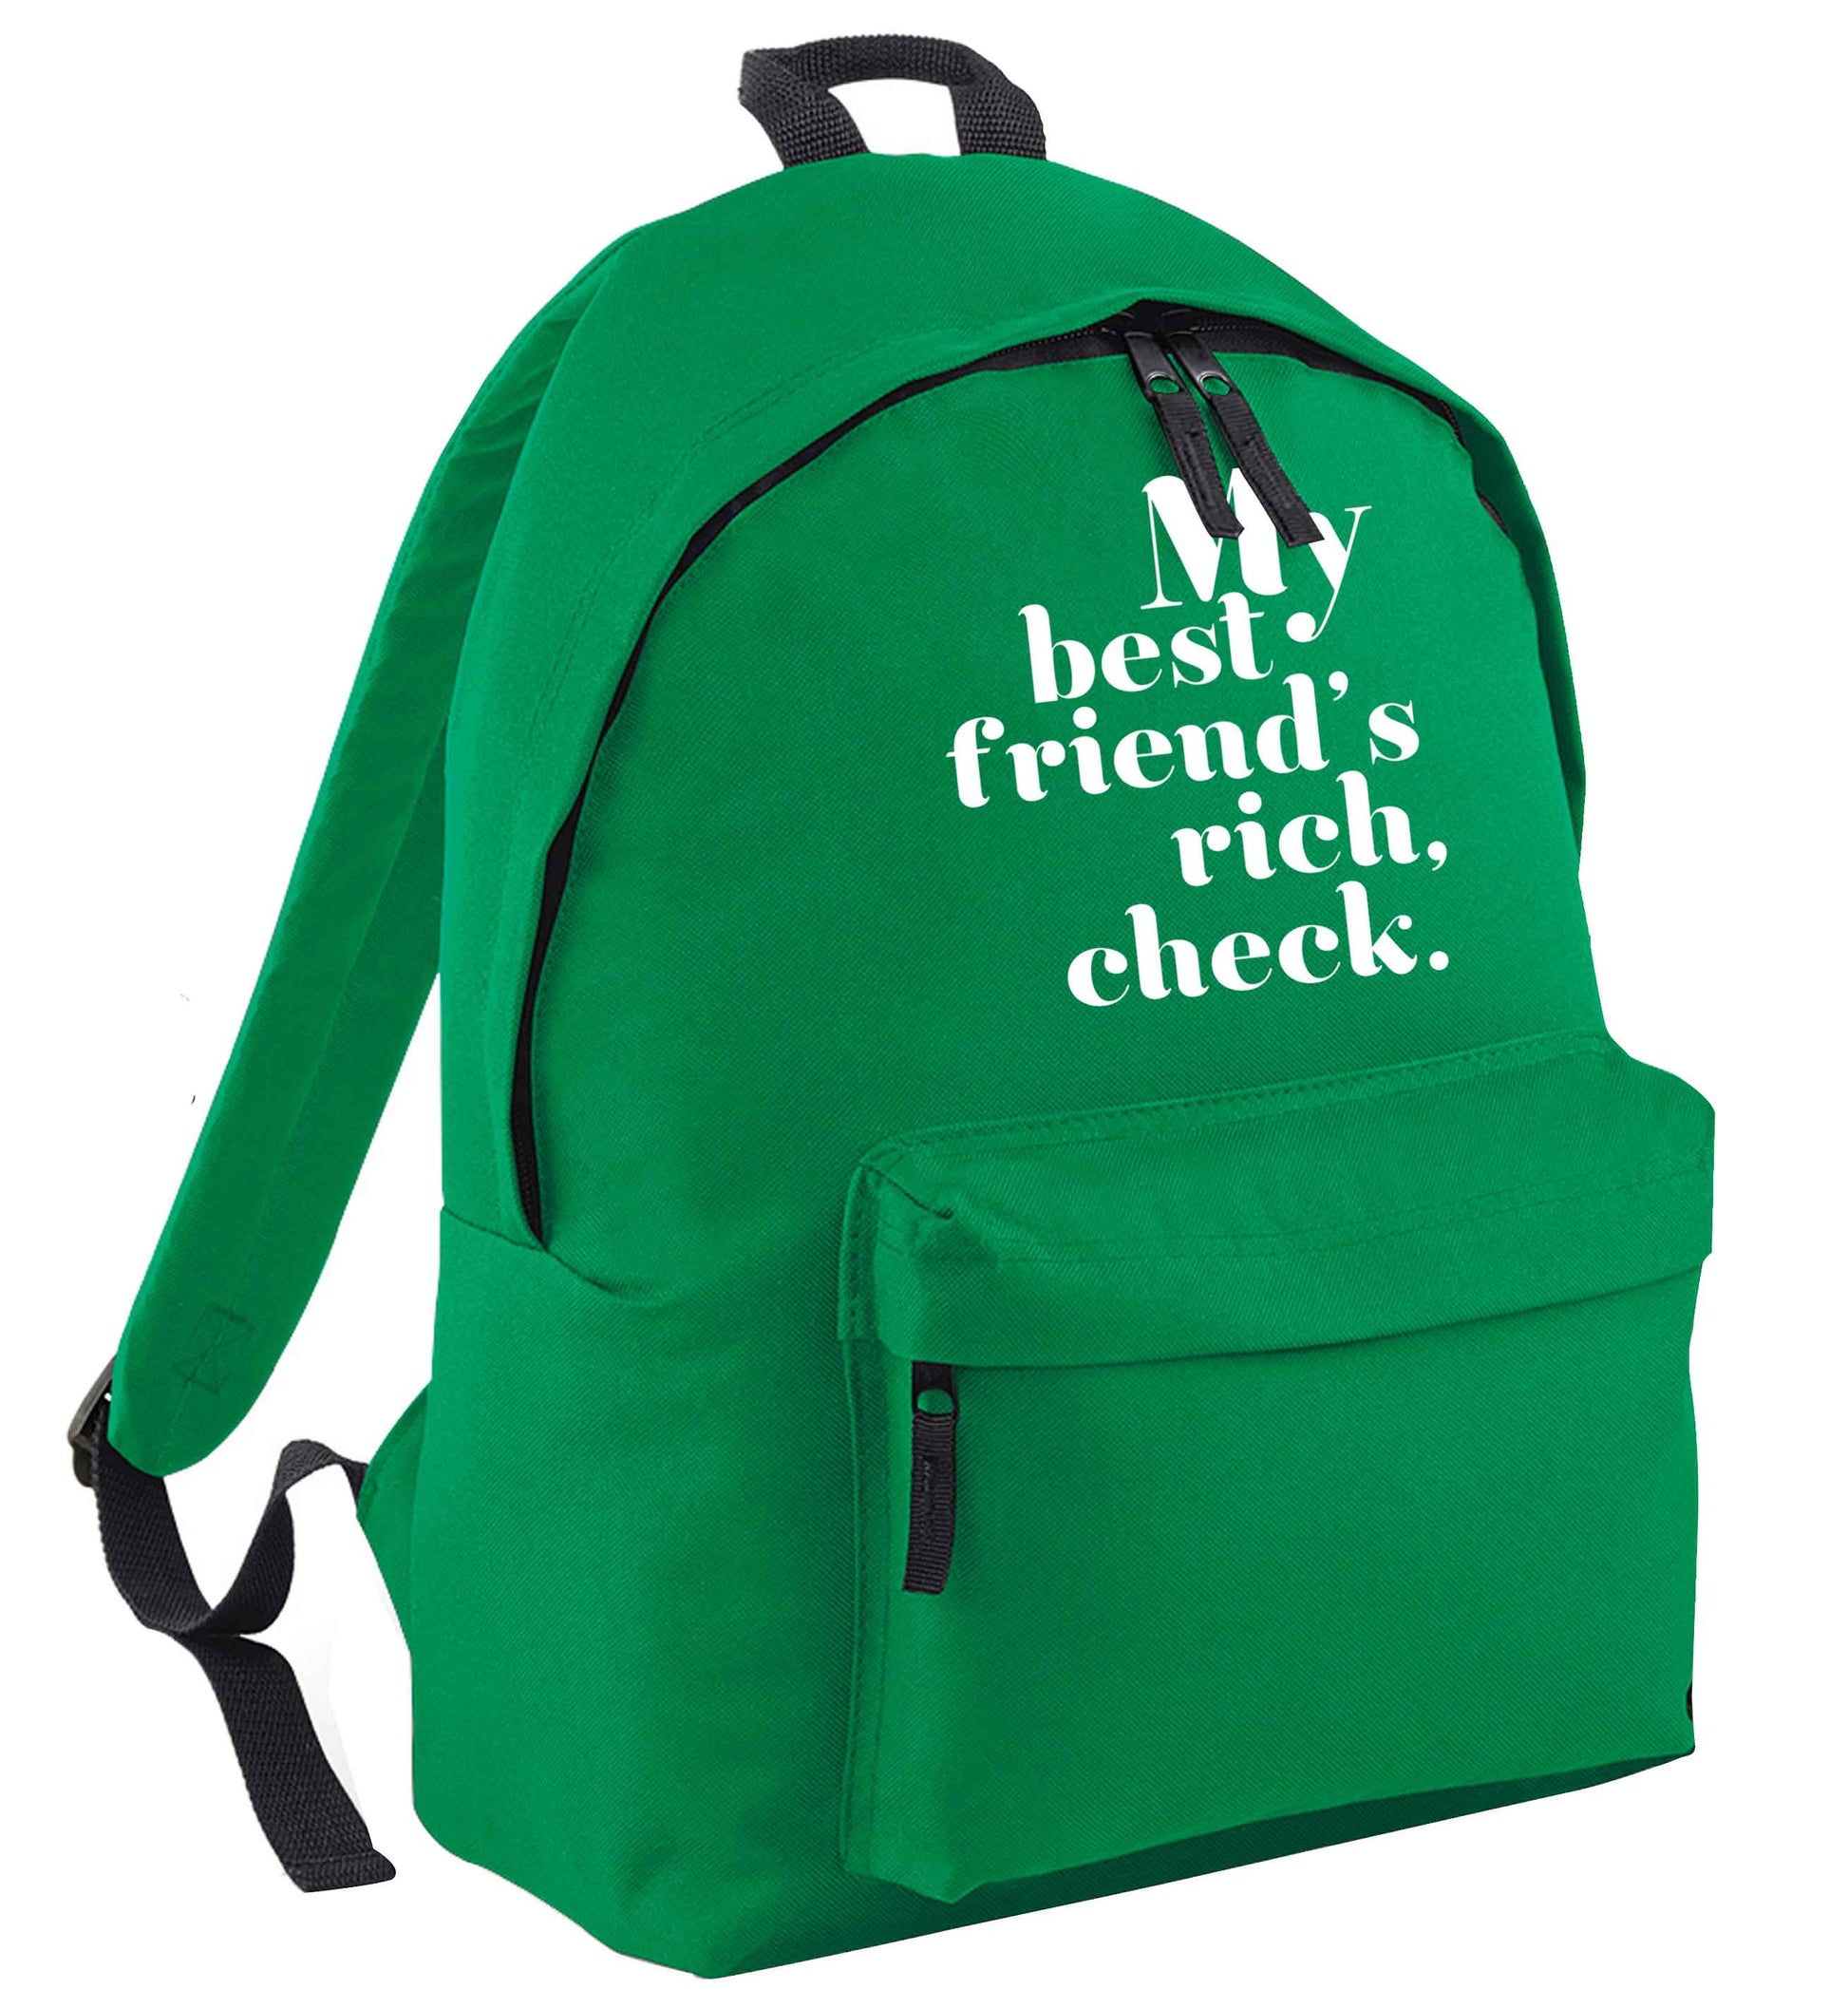 Got a rich best friend? Why not ask them to get you this, just let us  know and we'll tripple the price ;)  green adults backpack